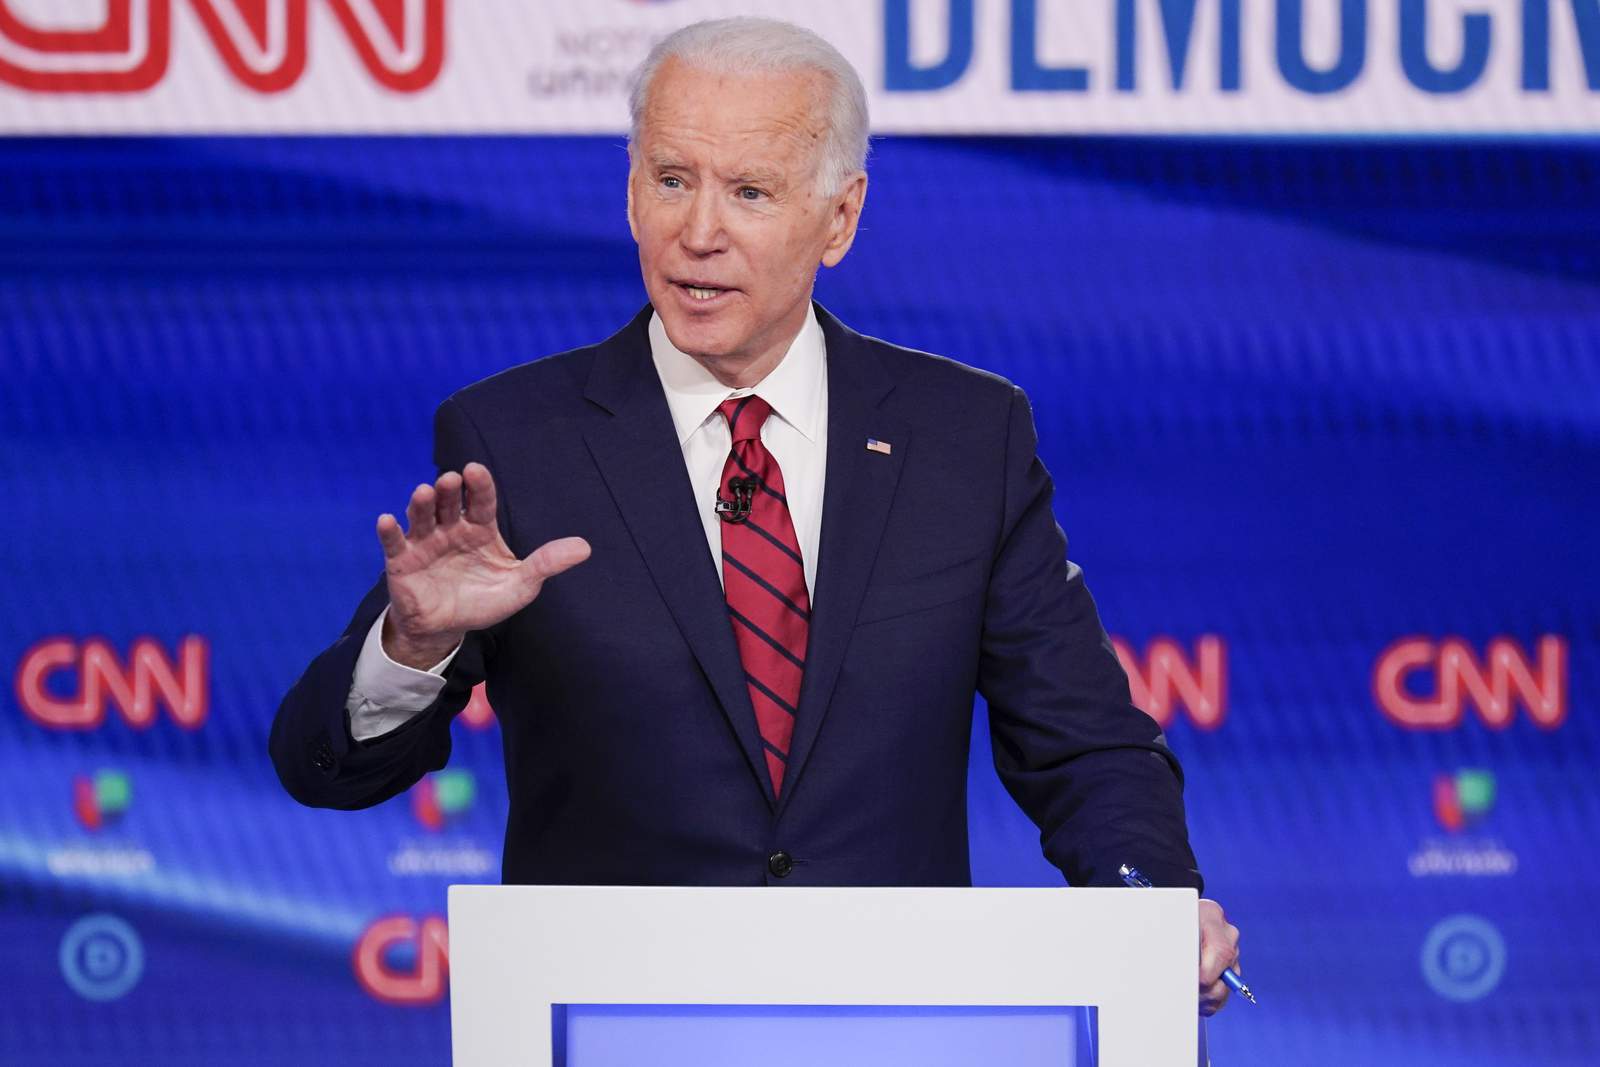 Biden says he was too 'cavalier' about black Trump backers